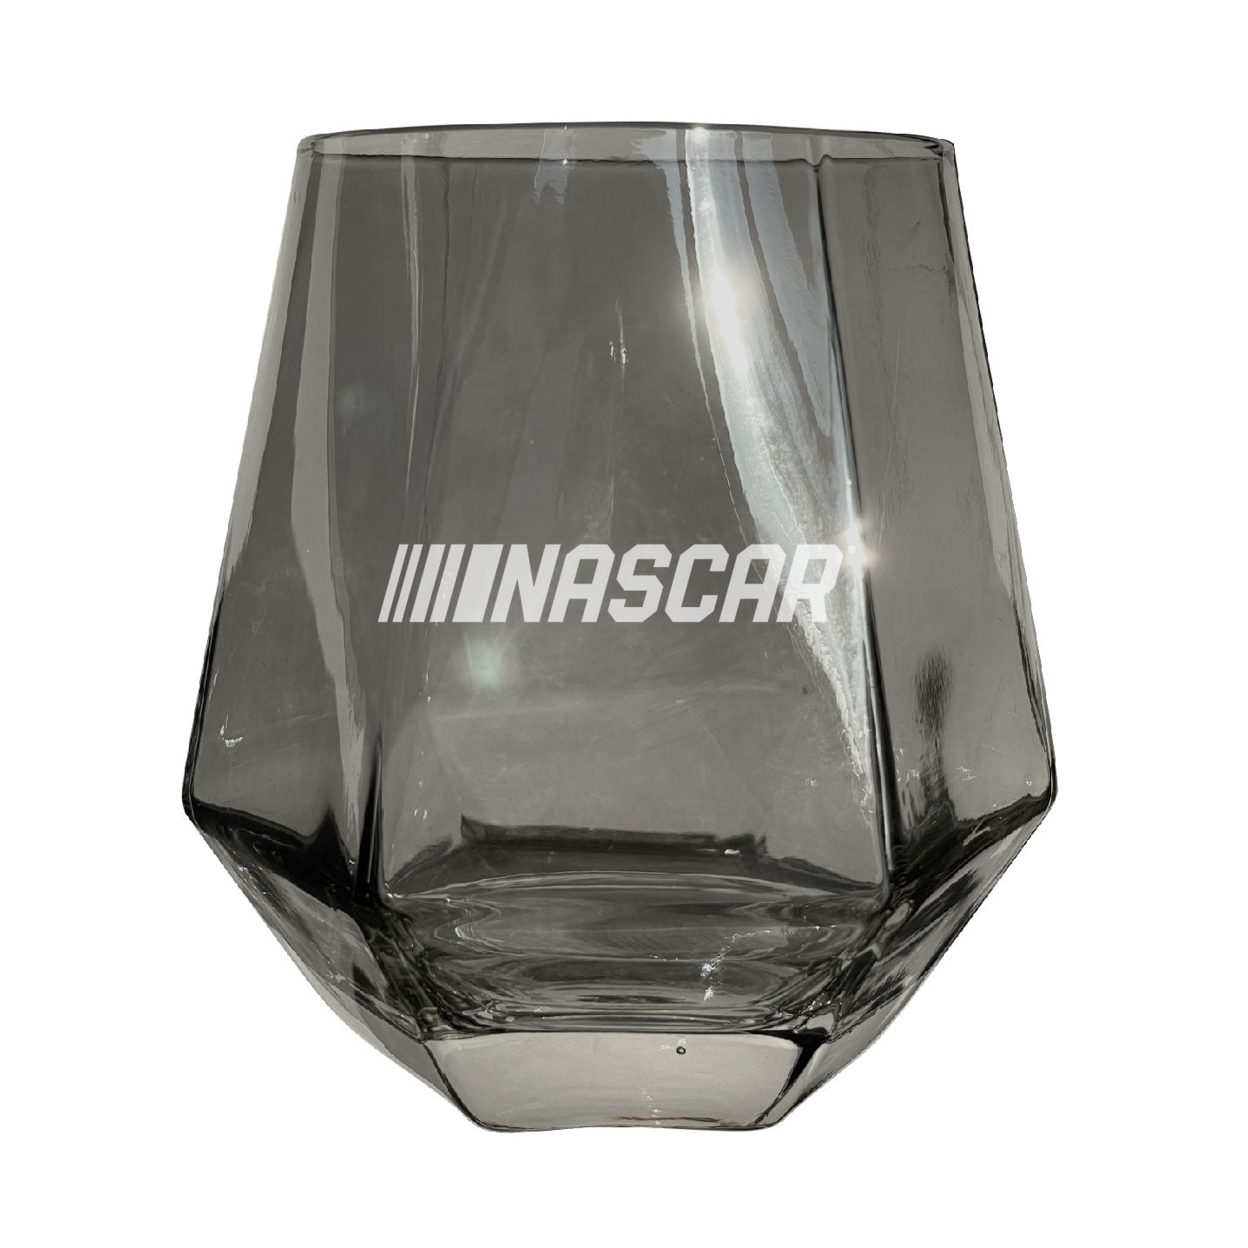 NASCAR Officially Licensed 10 Oz Engraved Diamond Wine Glass - Iridescent, 2-Pack